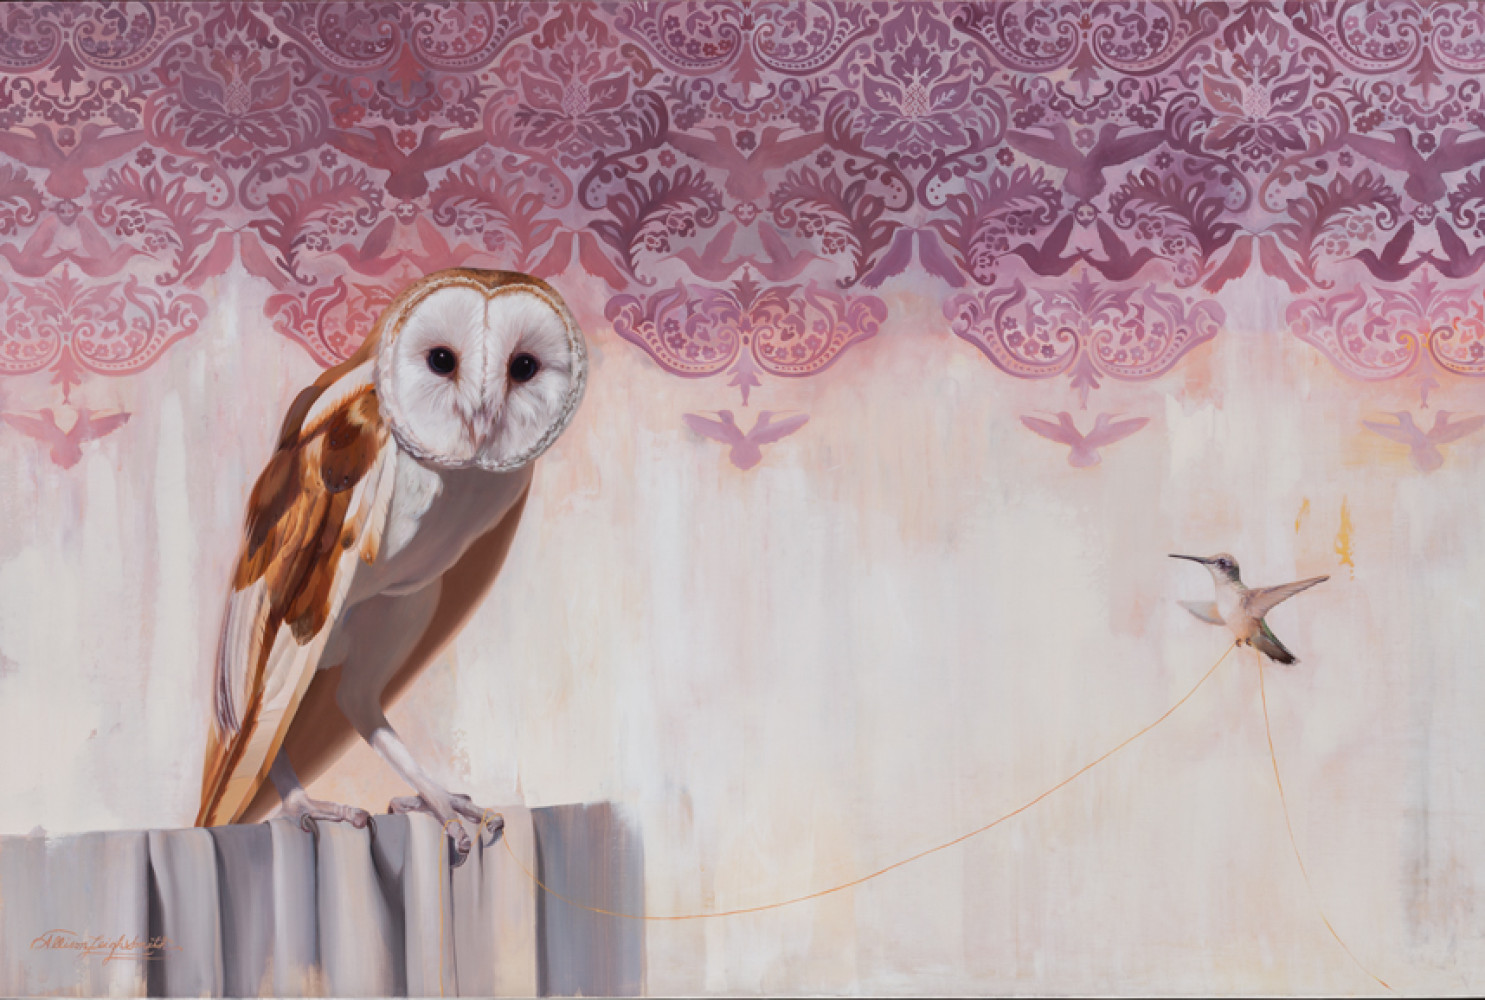 Peter Gerakaris (United States, b. 1981), Caravan (Owl), 2012. Oil on canvas. 84 x 84 inches. Purchased with funds generously donated by Adrienne and John Mars, National Museum of Wildlife Art. © Peter Gerakaris. M2016.042 